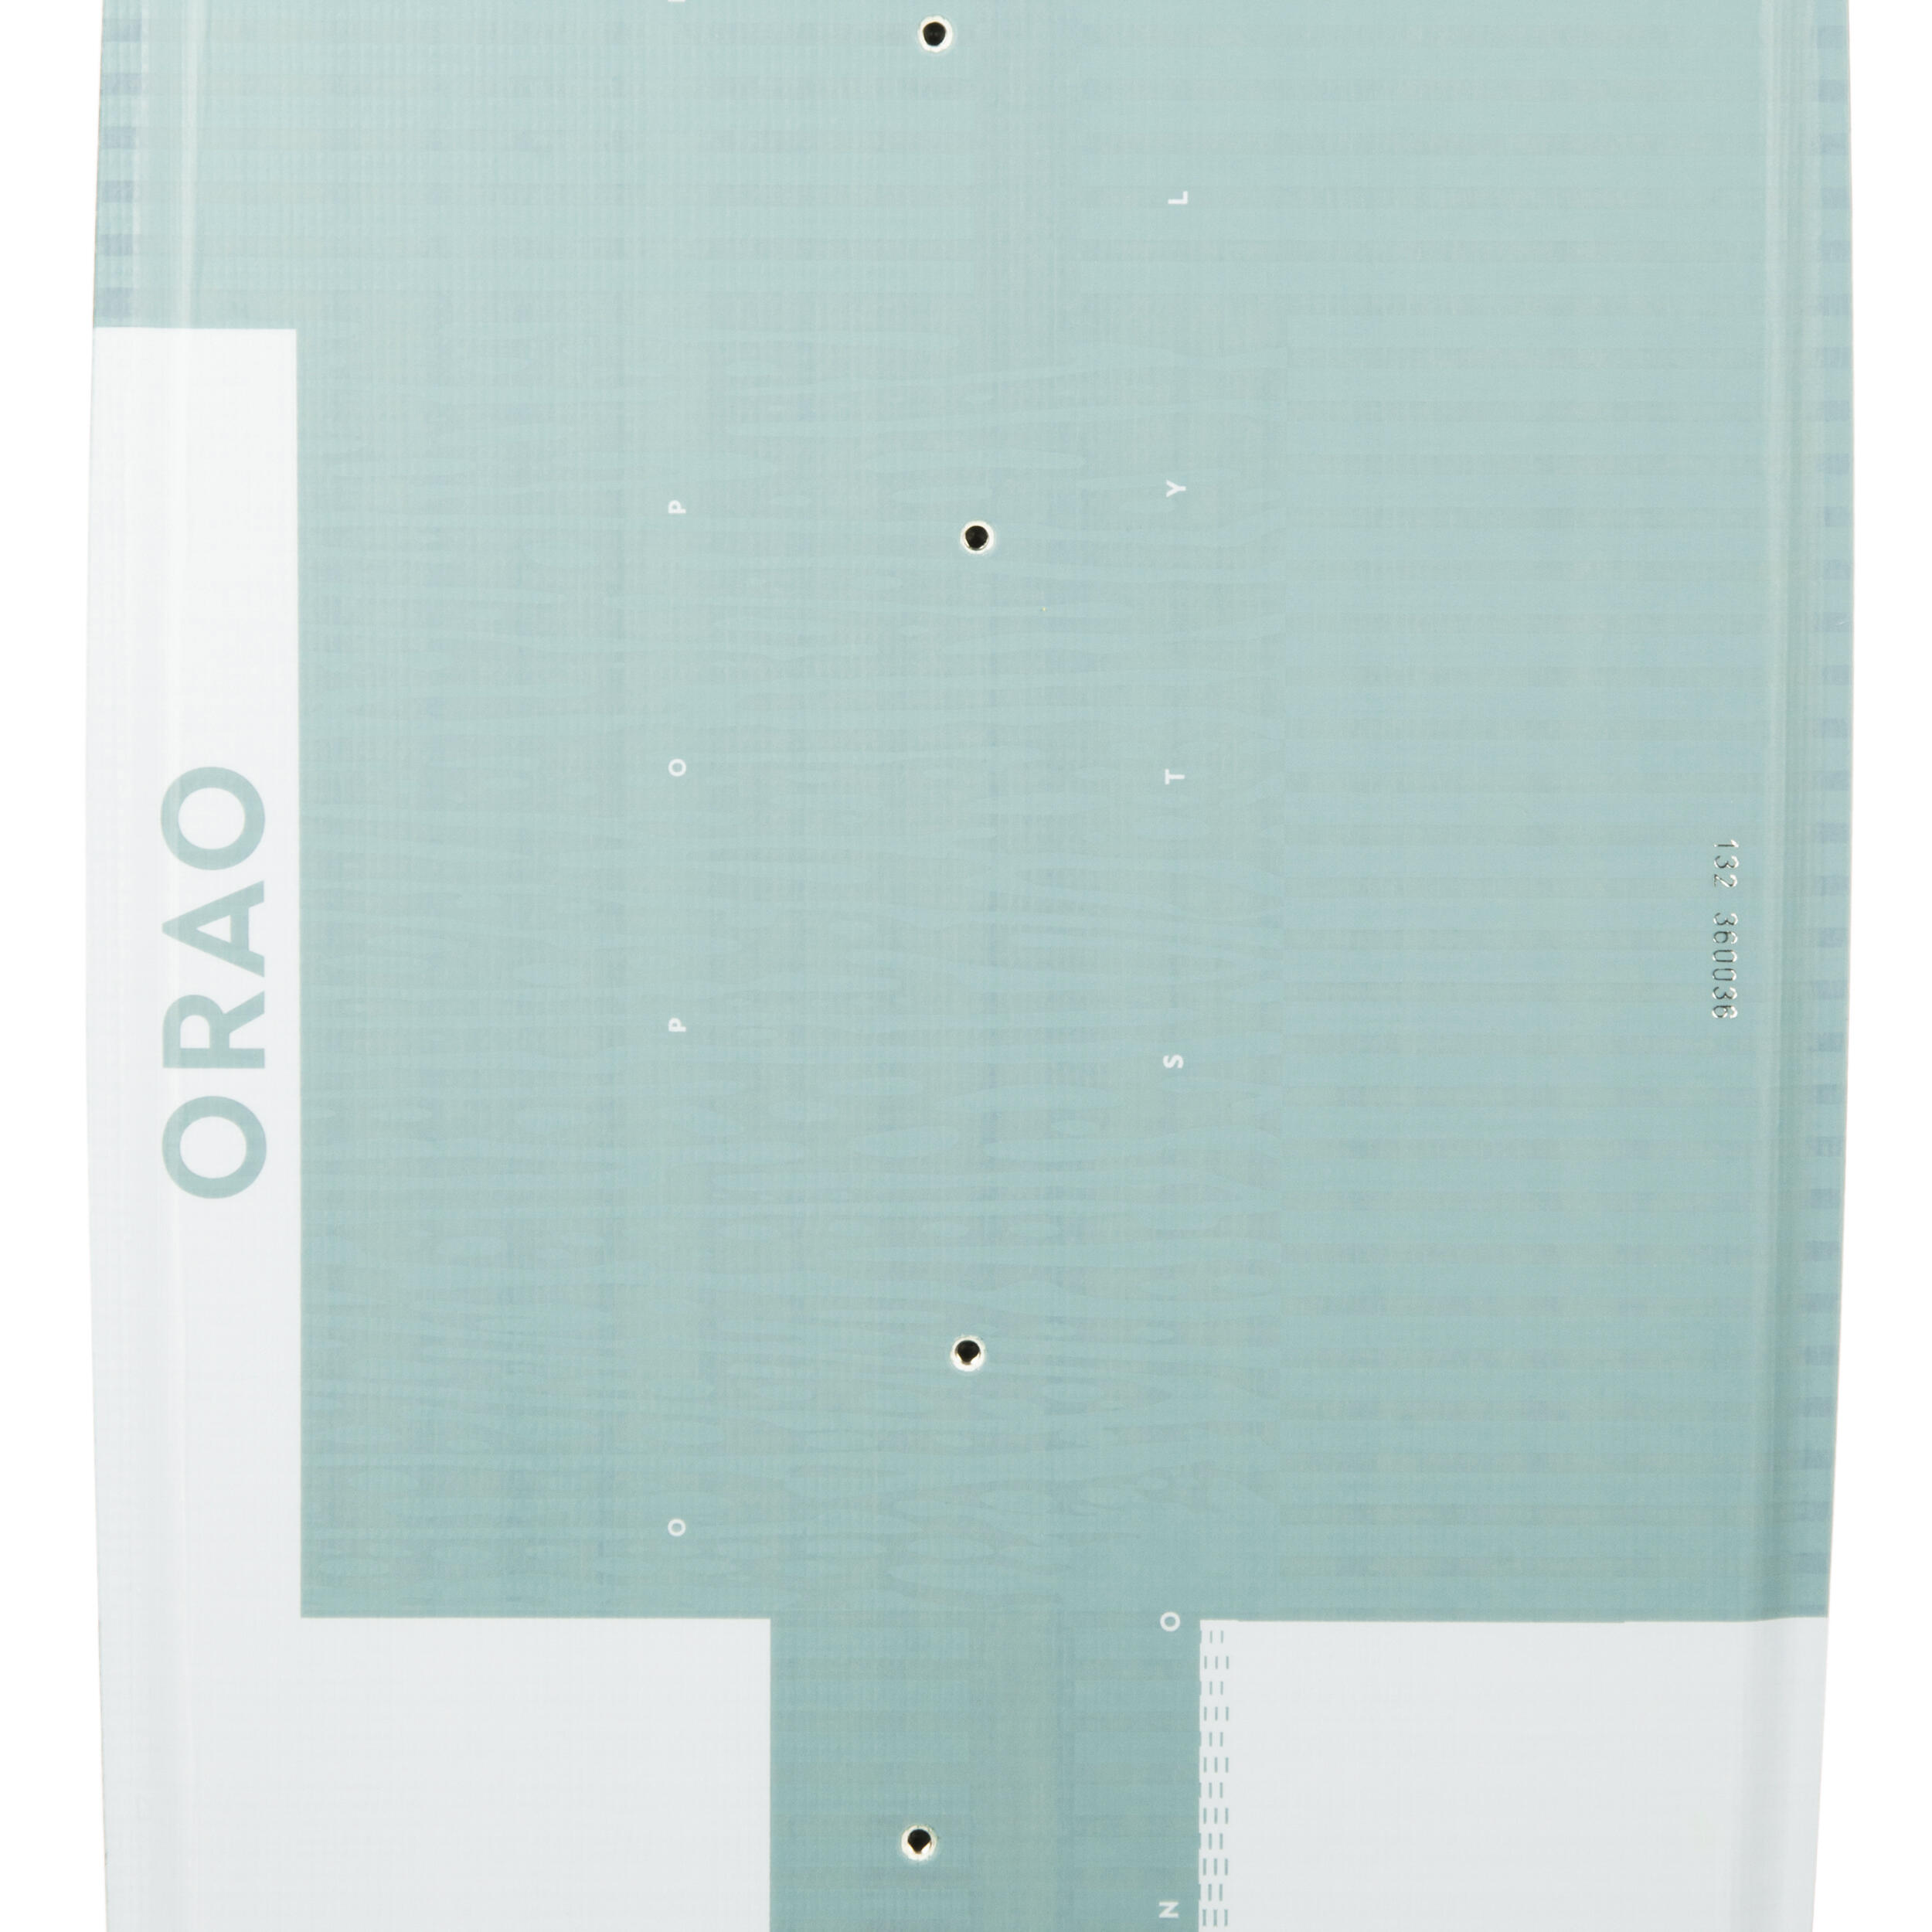 KITESURFING BOARD “TWIN-TIP 500" - CARBON - 132X39 CM (PADS AND STRAPS INCLUDED) 10/17